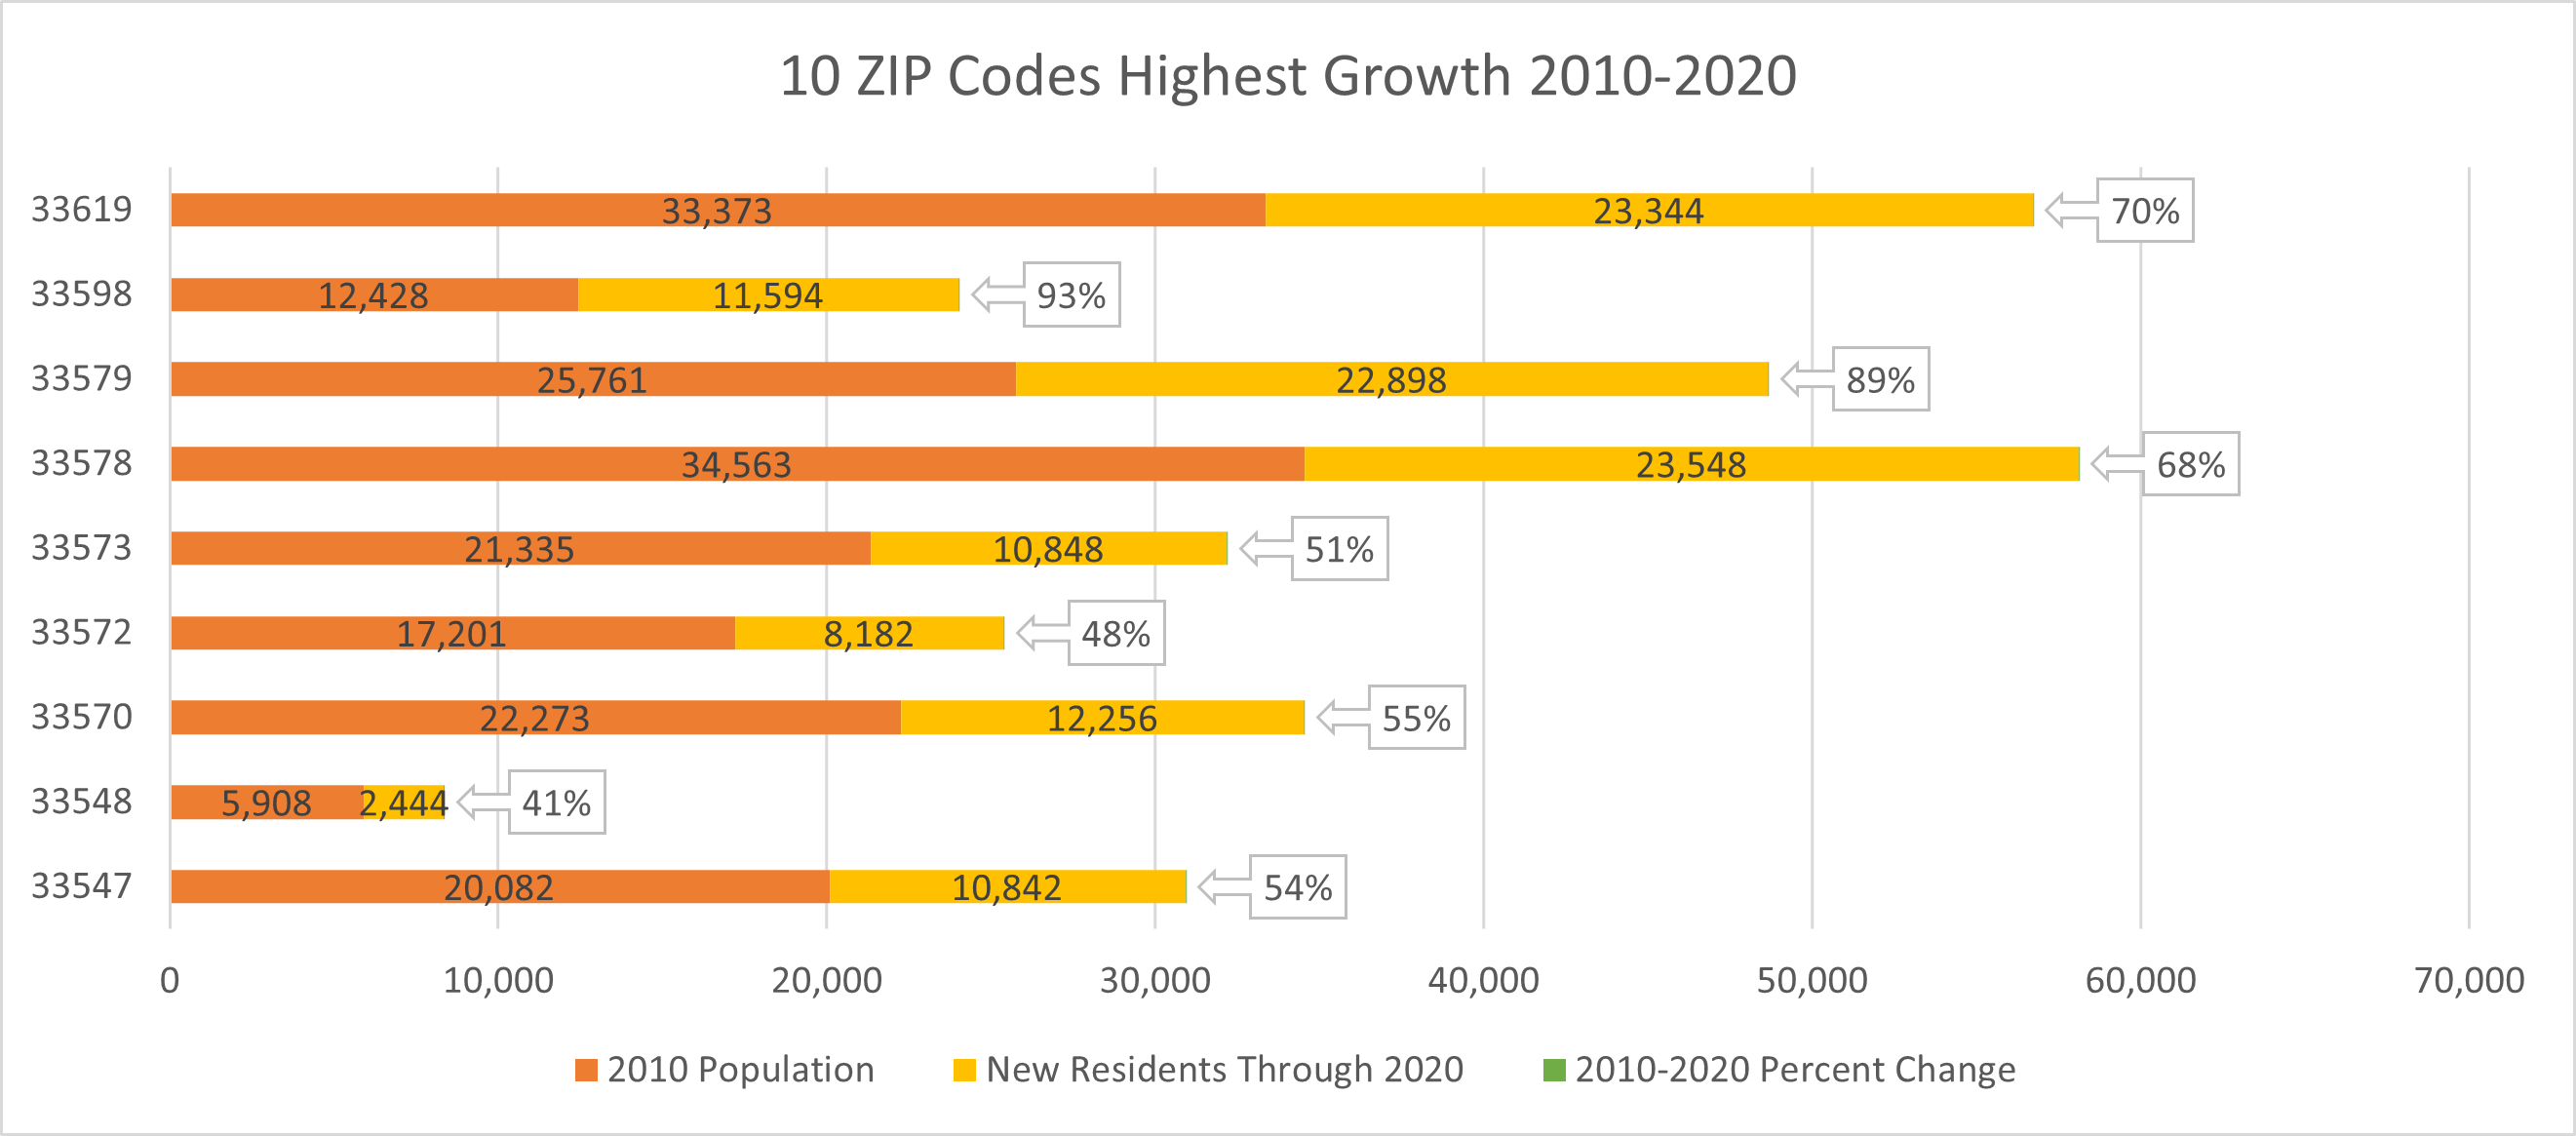 Figure shows 2010 population estimate and new resident through 2020 for the fastest growing ZIP Codes in unincorporated Hillsborough County. These ZIP Codes are: 33534 33547 33548 33570 33572 33573 33578 33579 33598 33619